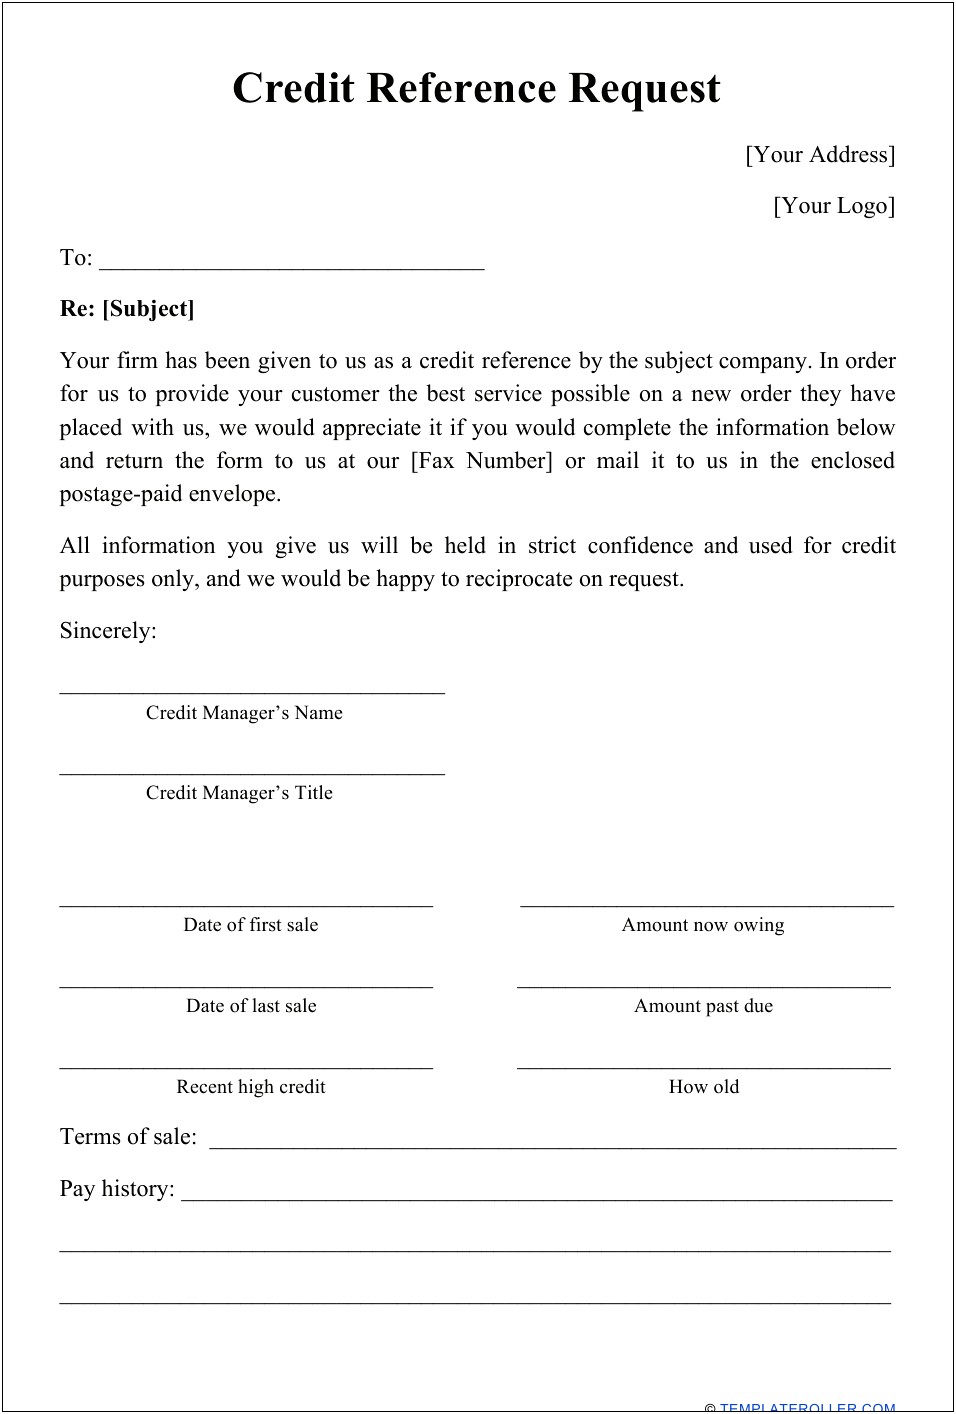 Free Downloadable Check Request Form Template Word